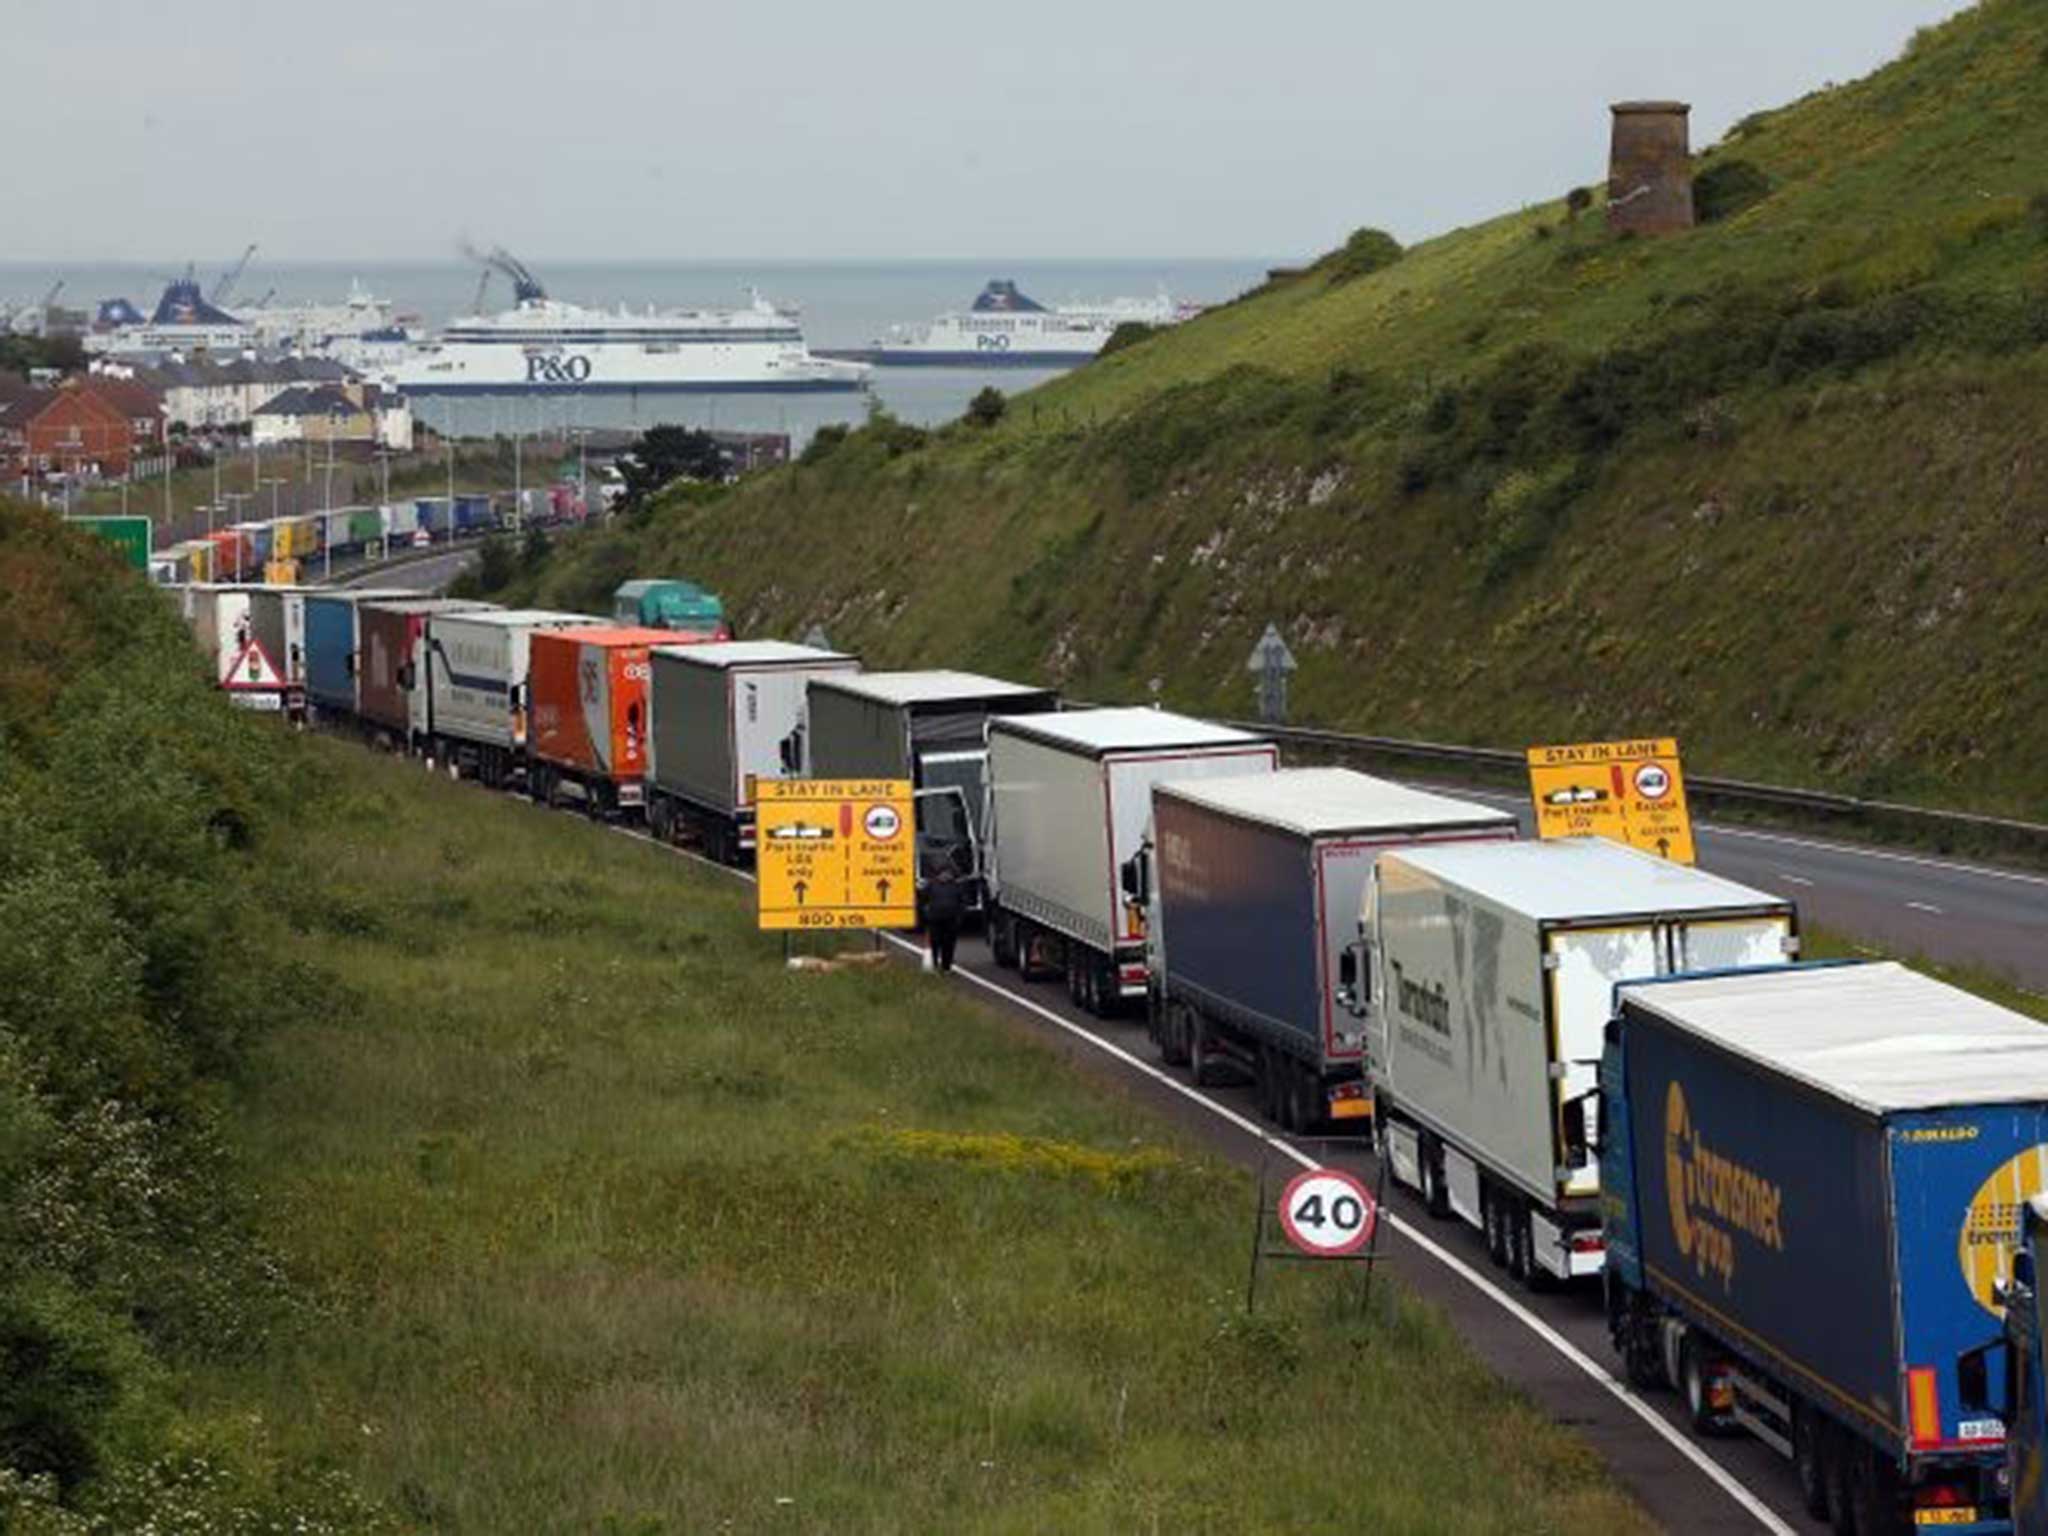 Kent police have confirmed that 'Operation Stack' will remain in force until the backlog is cleared